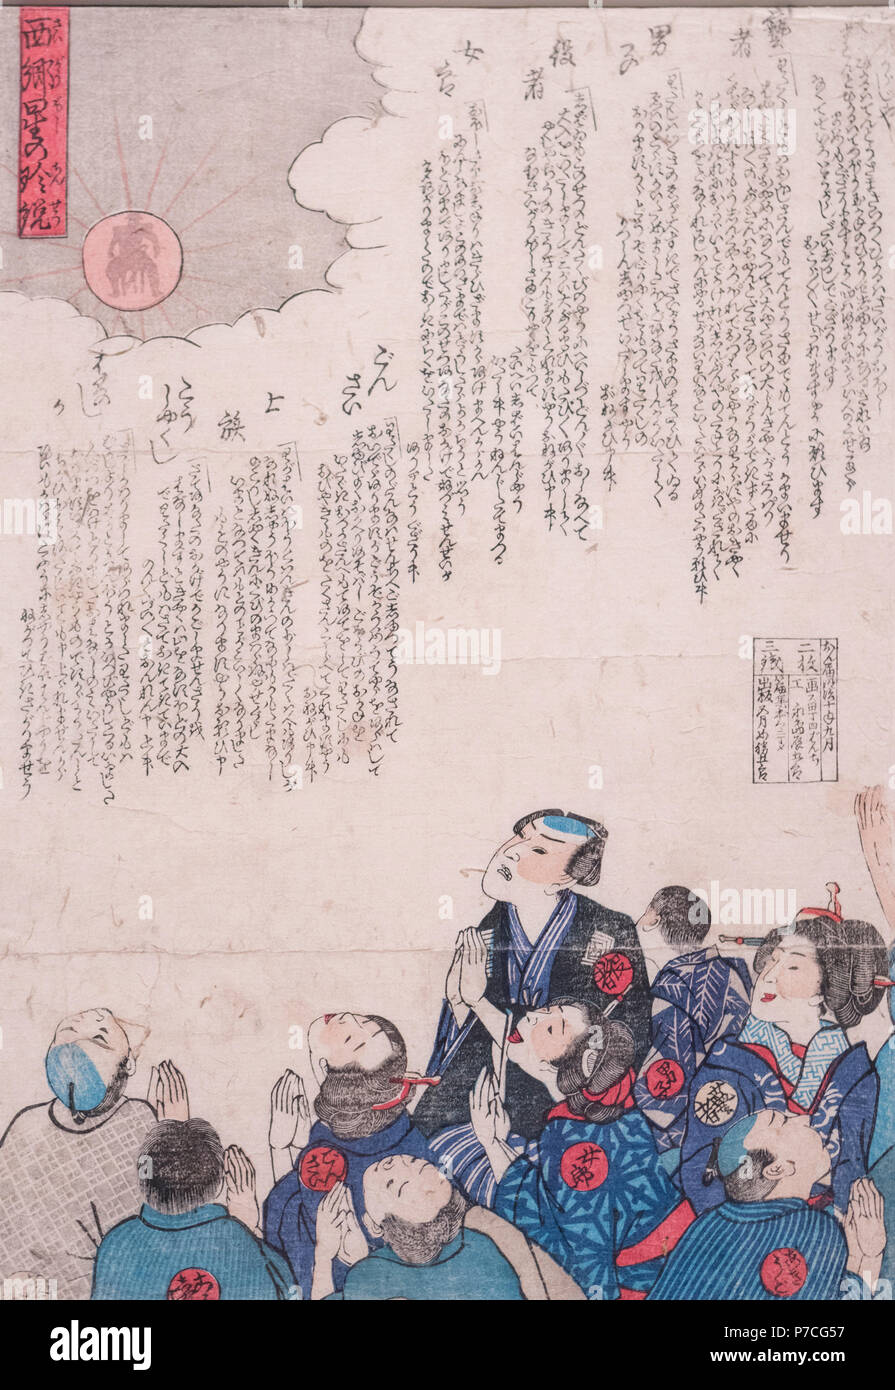 Saigo boshi no chinsetsu (A rare story of Saigo star) 1877, by Utagawa Yoshitora, Private Collection.  Saigo boshi means "The last star" in Japanese. In 1877, Takamori Saigo died in Satsuma Rebellion. This year, the Mars had came close to the earth and emitted strong light. Then rumor that Takamori Saigo was seen in the star was distributed. Many pictures were created related in that incident. Stock Photo